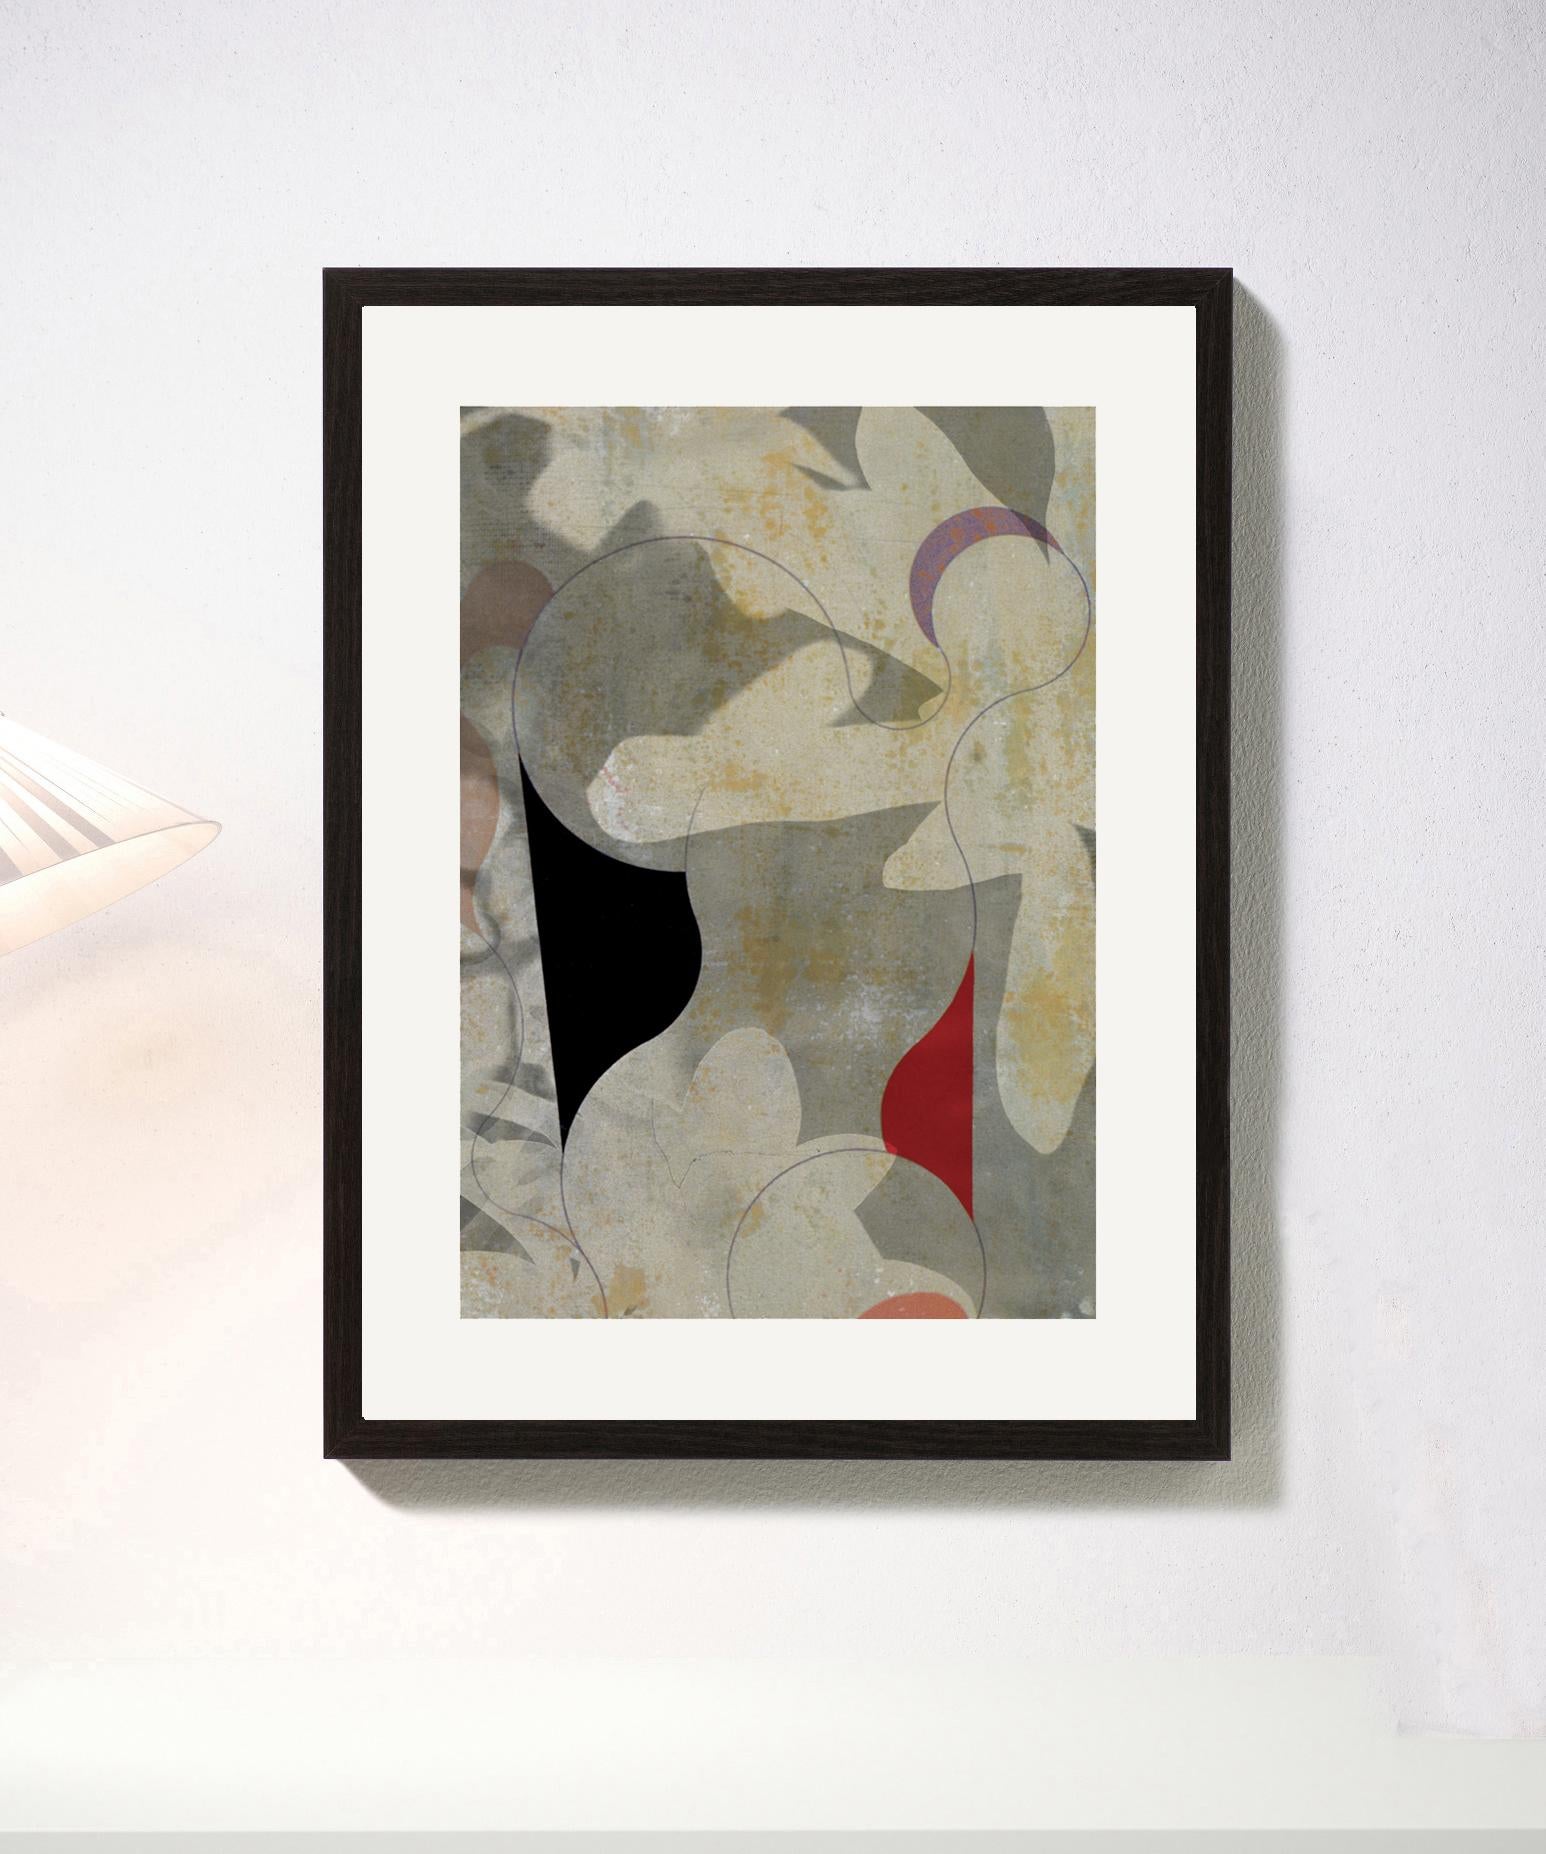 white -Contemporary, Abstract, Modern, Pop art, Surrealist, Landscape, Nature - Print by Francisco Nicolás